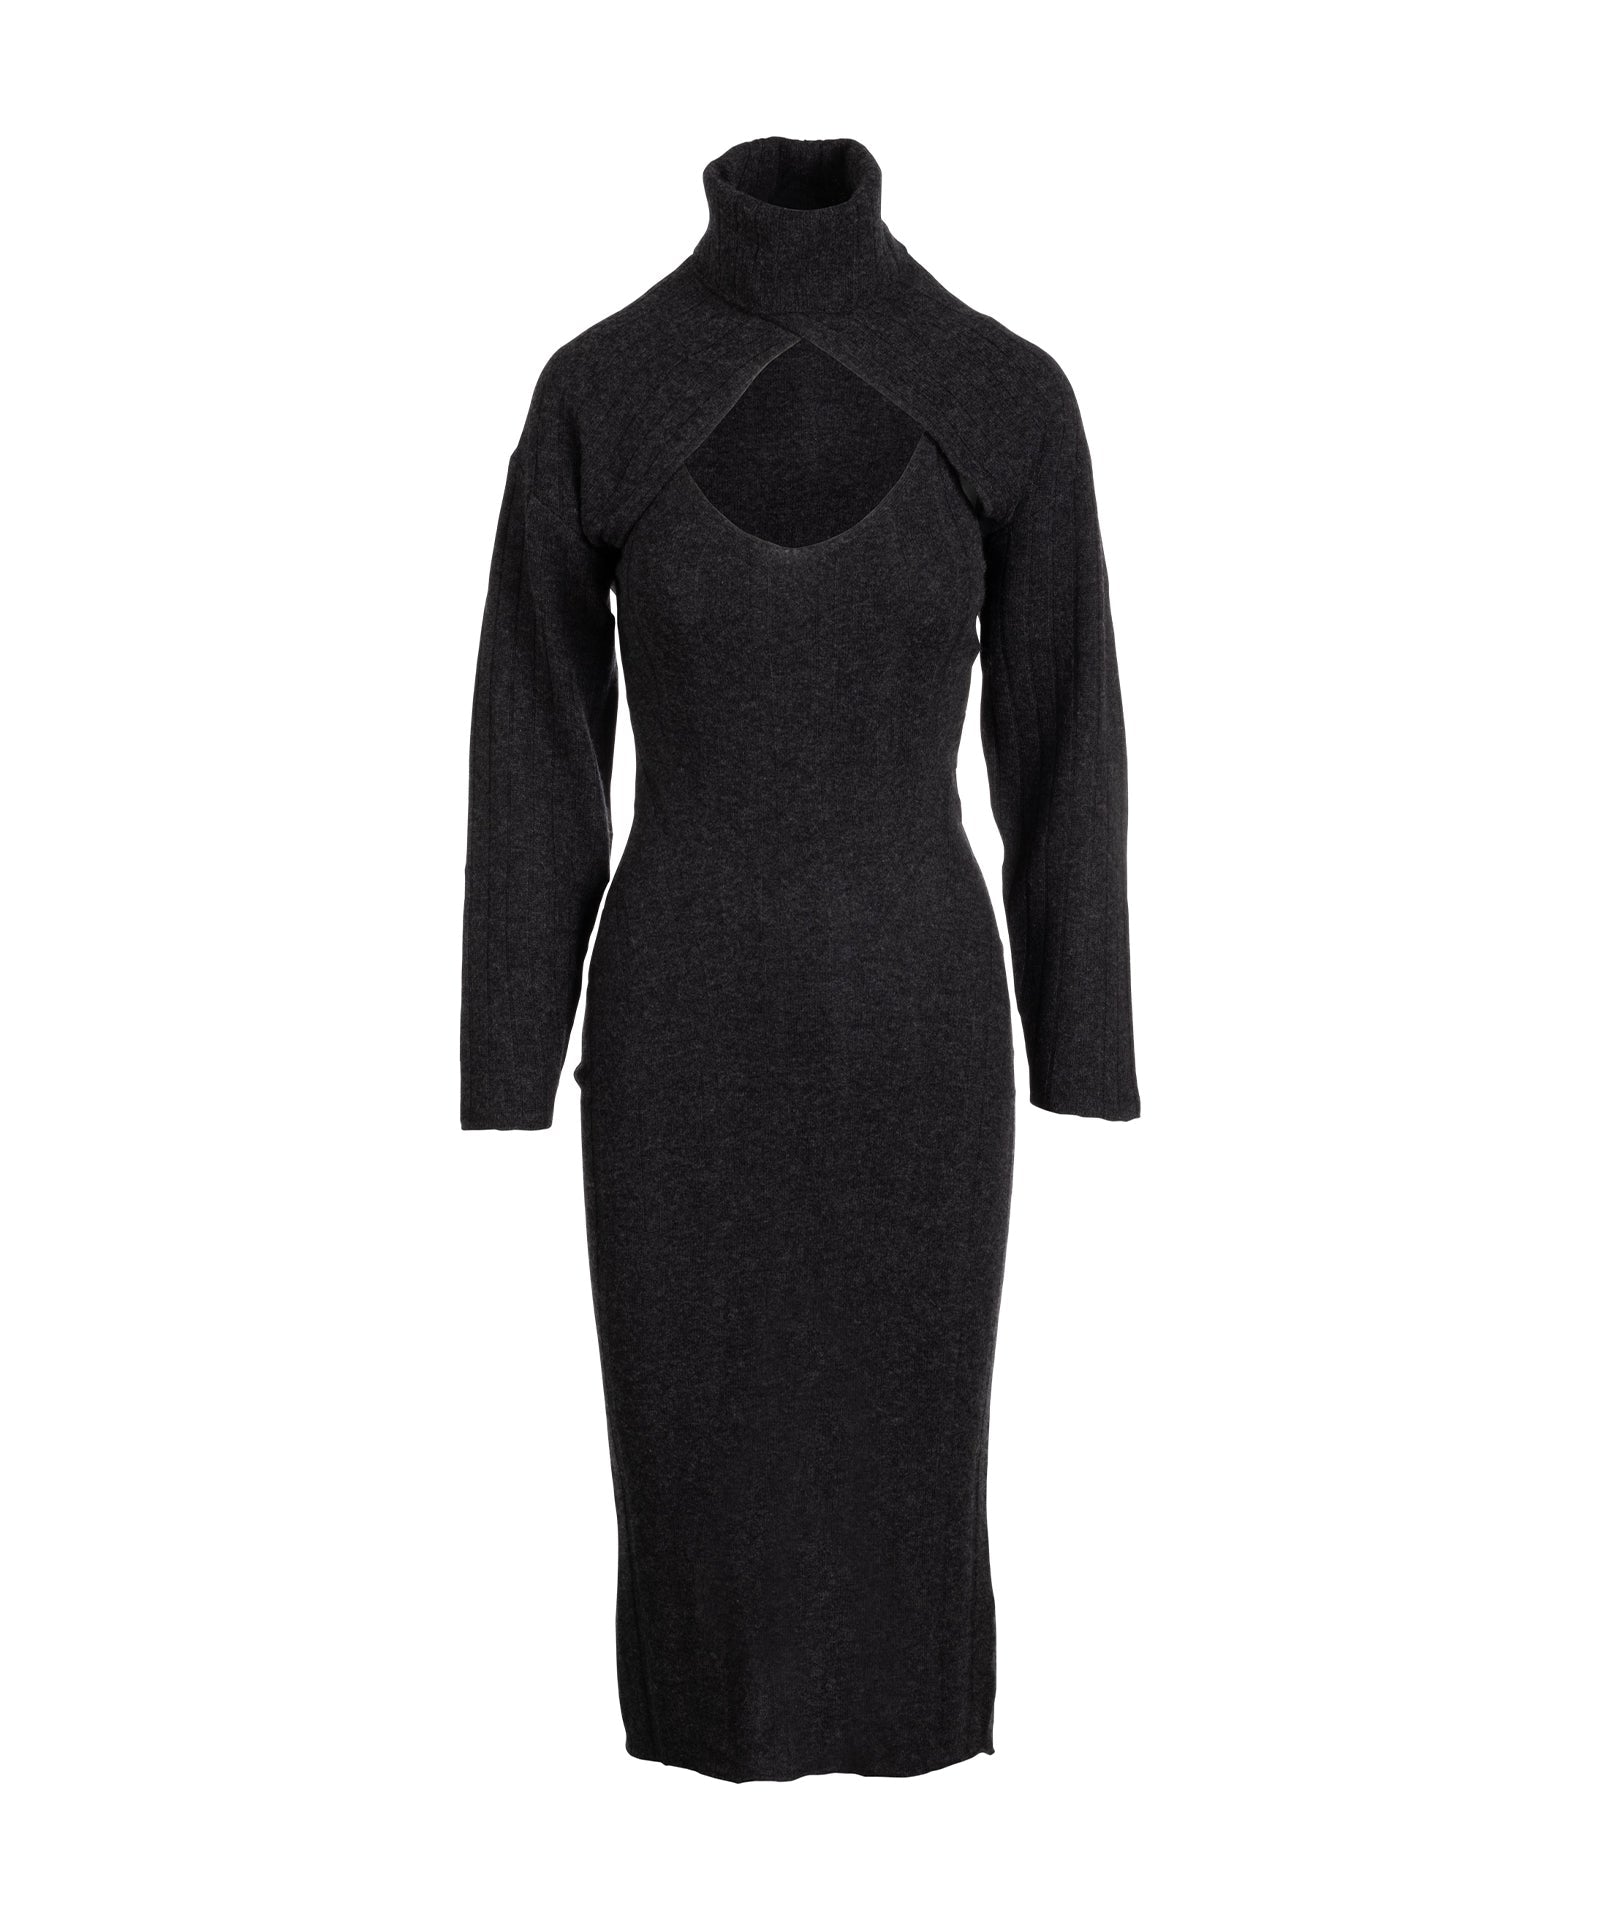 Ribbed Wool and Cashmere Blend Sleeveless Turtleneck Dress